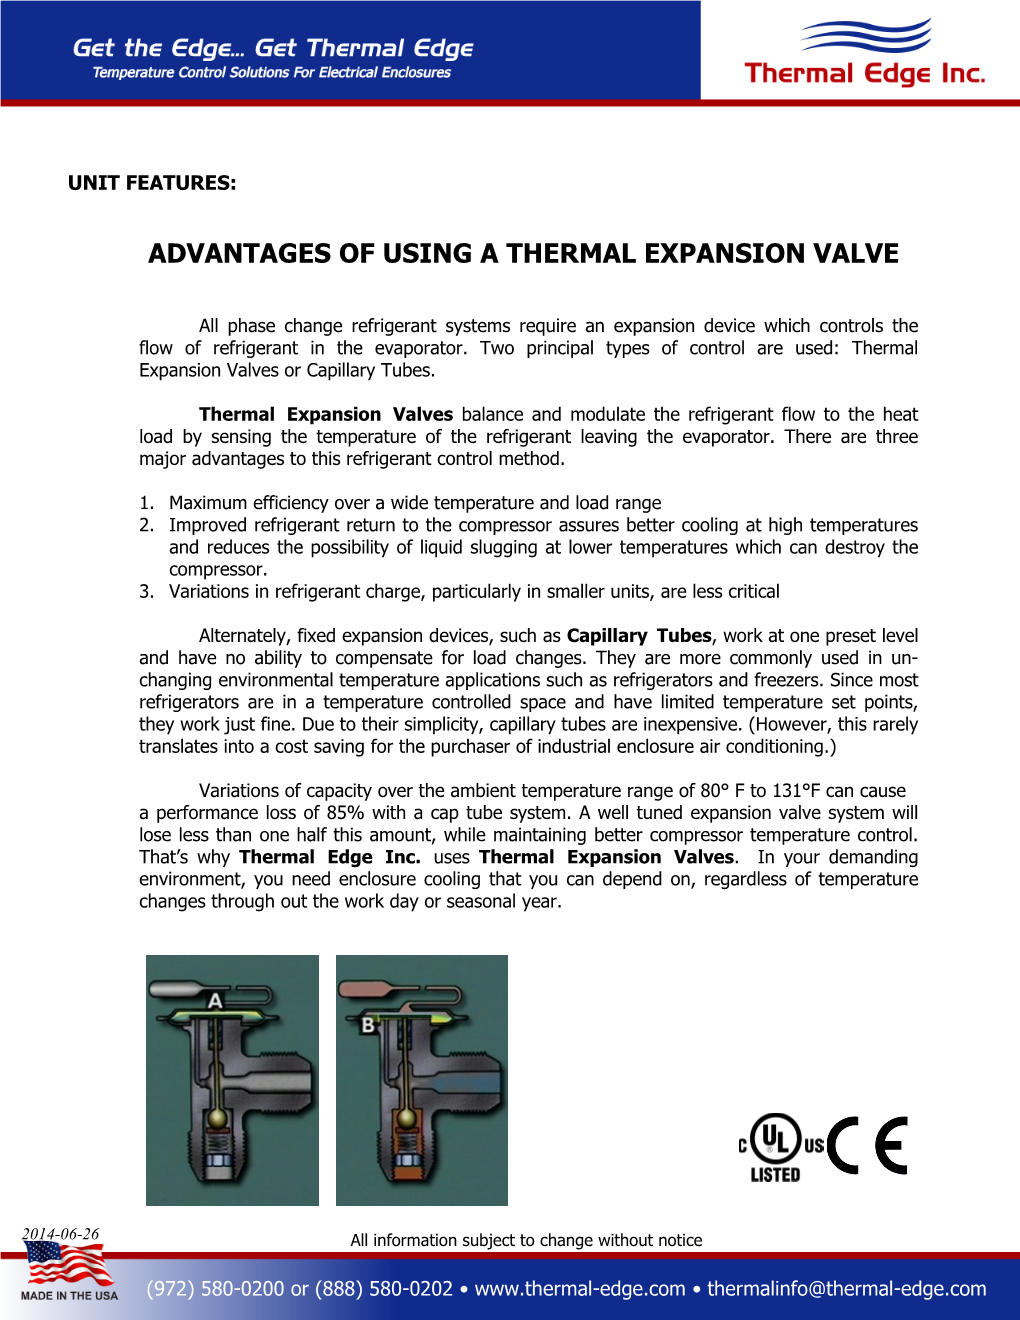 Advantages of Using a Thermal Expansion Valve